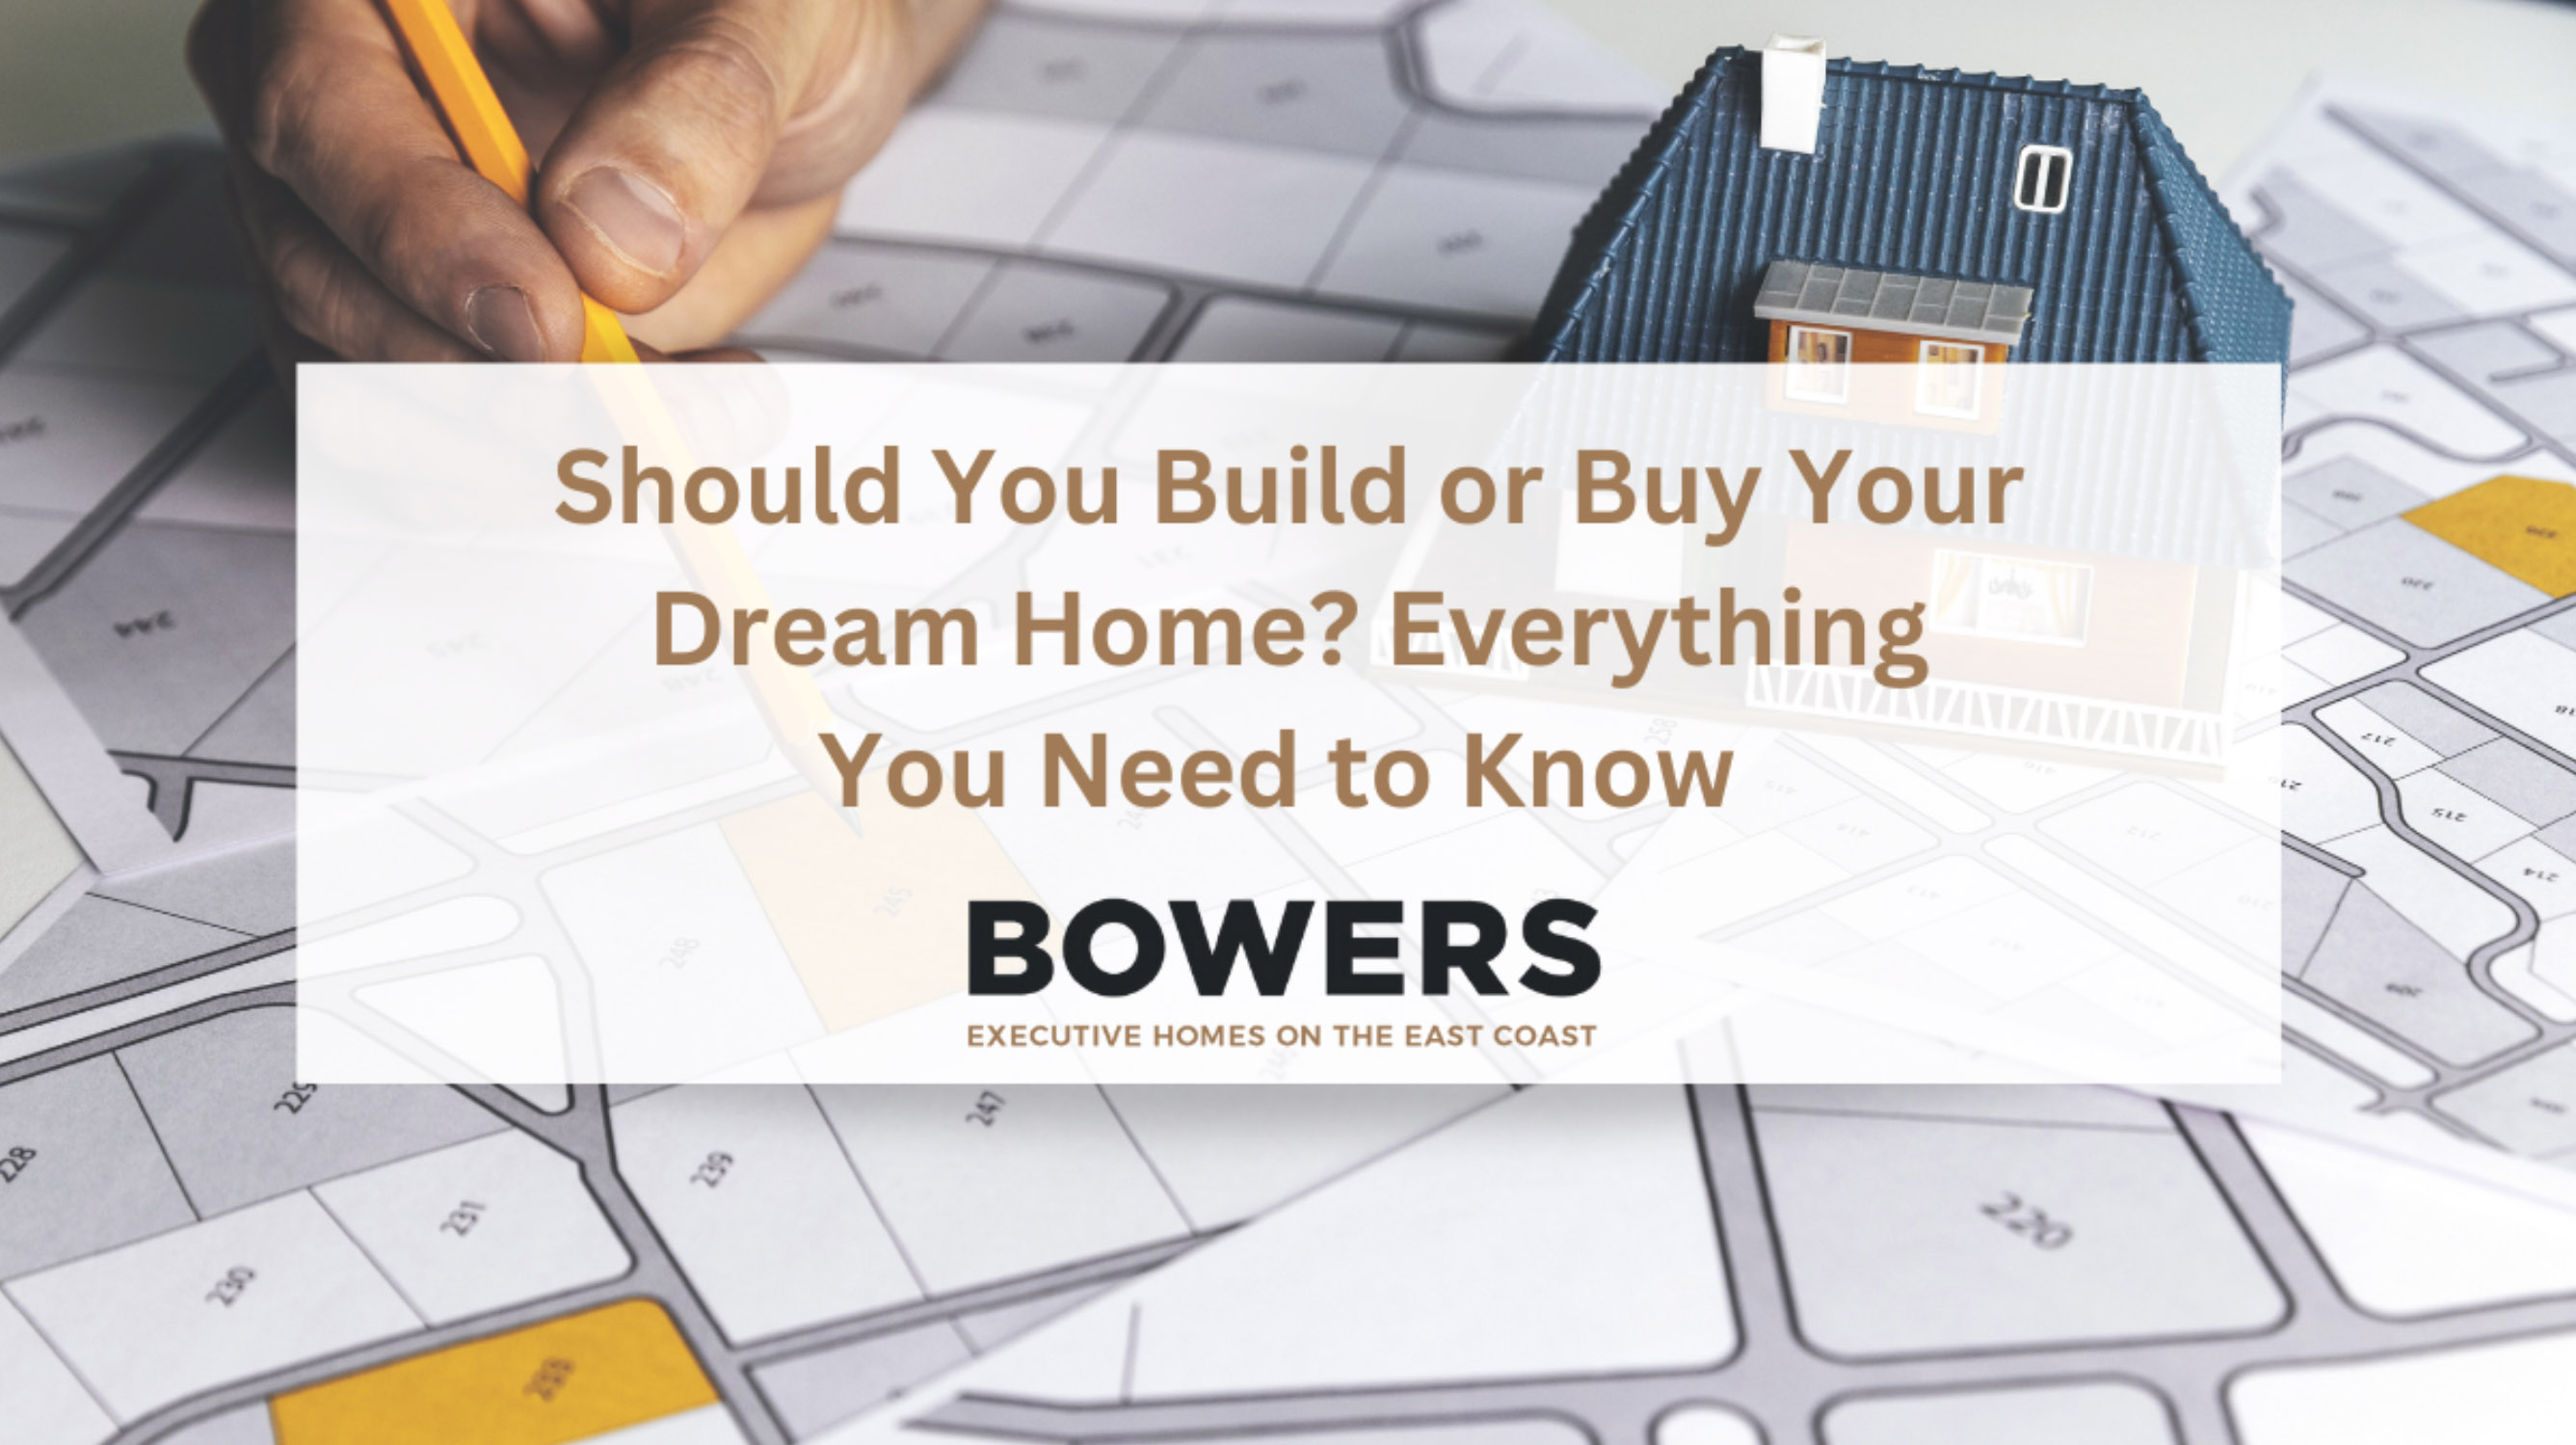 Should You Build or Buy Your Dream Home?